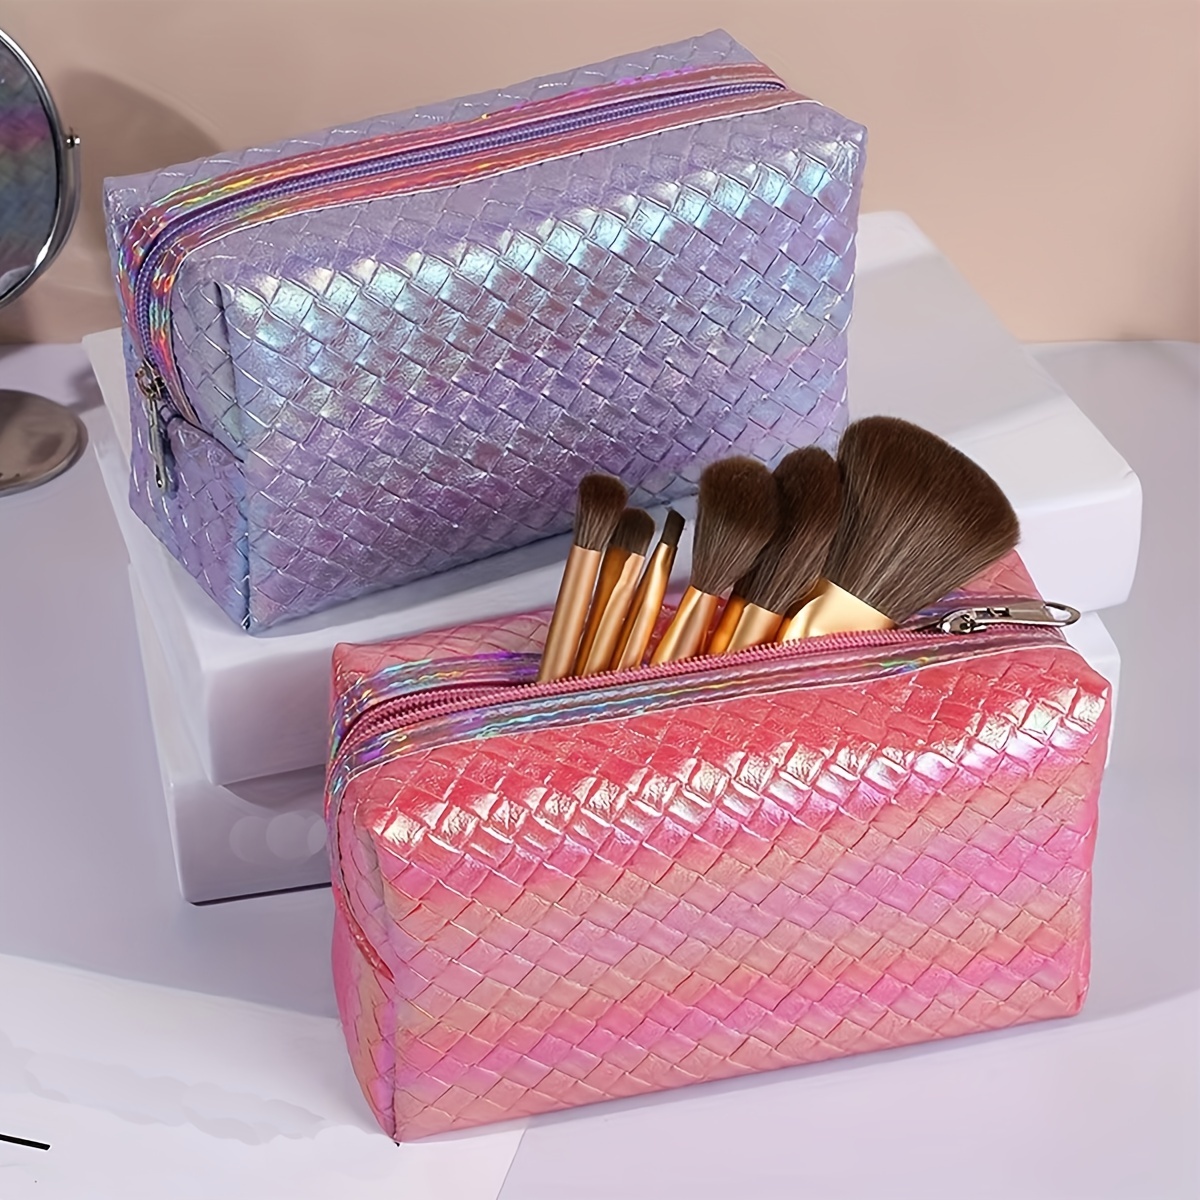  Cosmetic Travel Bag Checkered Makeup Bags For Women  Hand-Portable PU Leather Waterproof Cosmetic Bag with Adjustable Dividers Toiletry  bag Artist Storage Bag (Checkered) : Beauty & Personal Care